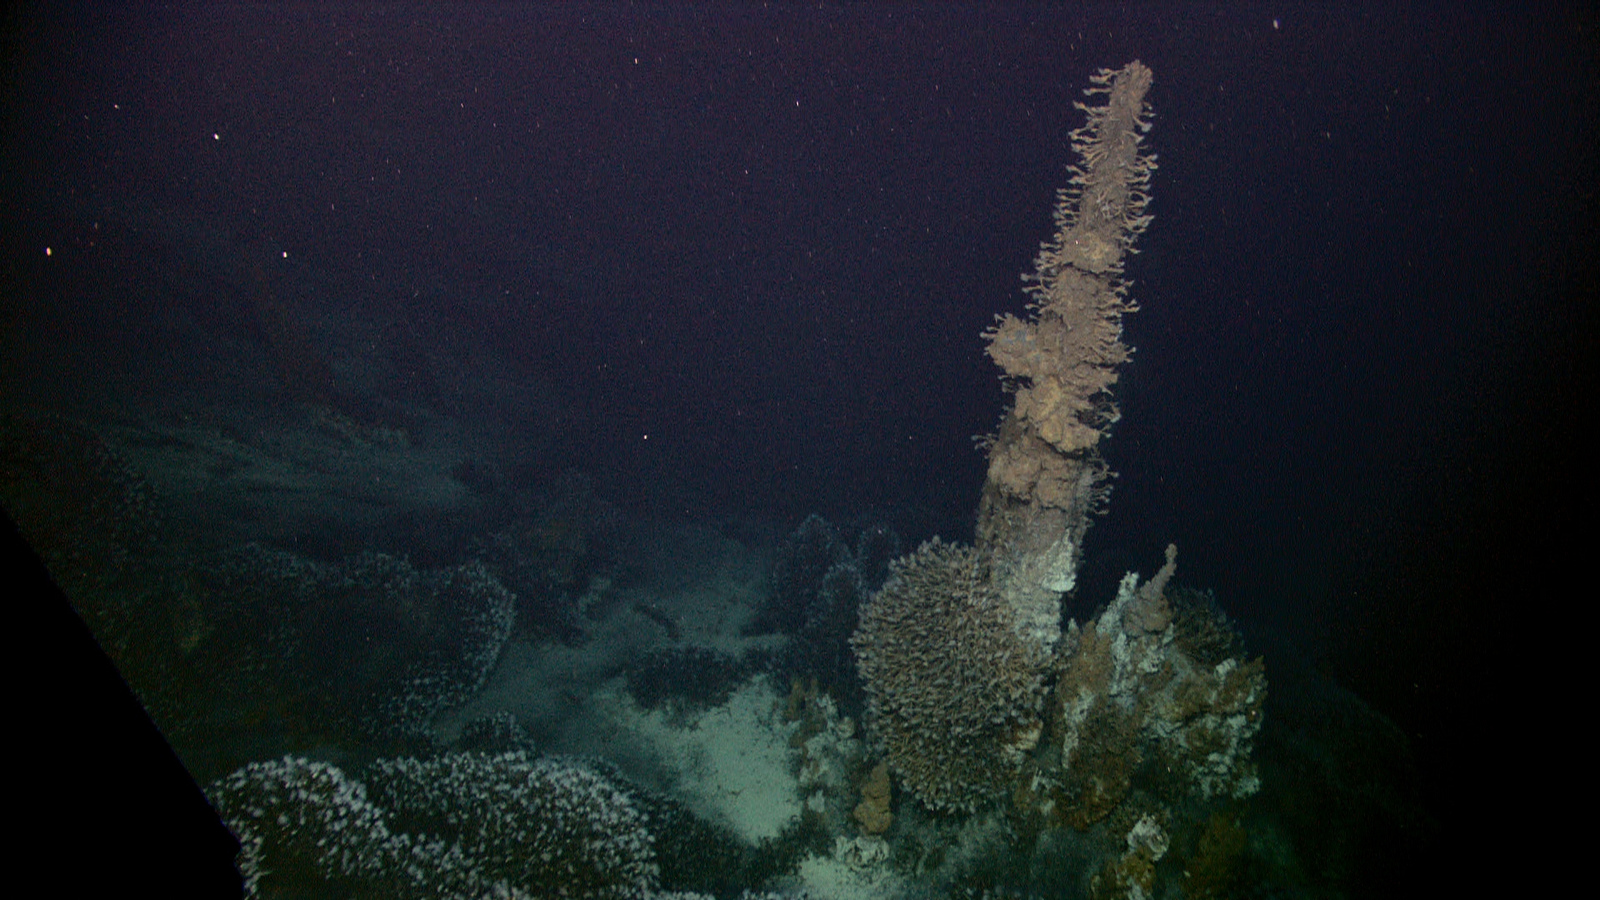 Barnacles attached to hydrothermal vent spires feeding at Kawio Barat. Critics of the Solwara 1 project raised concerns about its potential impact on the ecosystems that center on hydrothermal vents. Image courtesy of NOAA Okeanos Explorer Program, INDEX-SATAL 2010